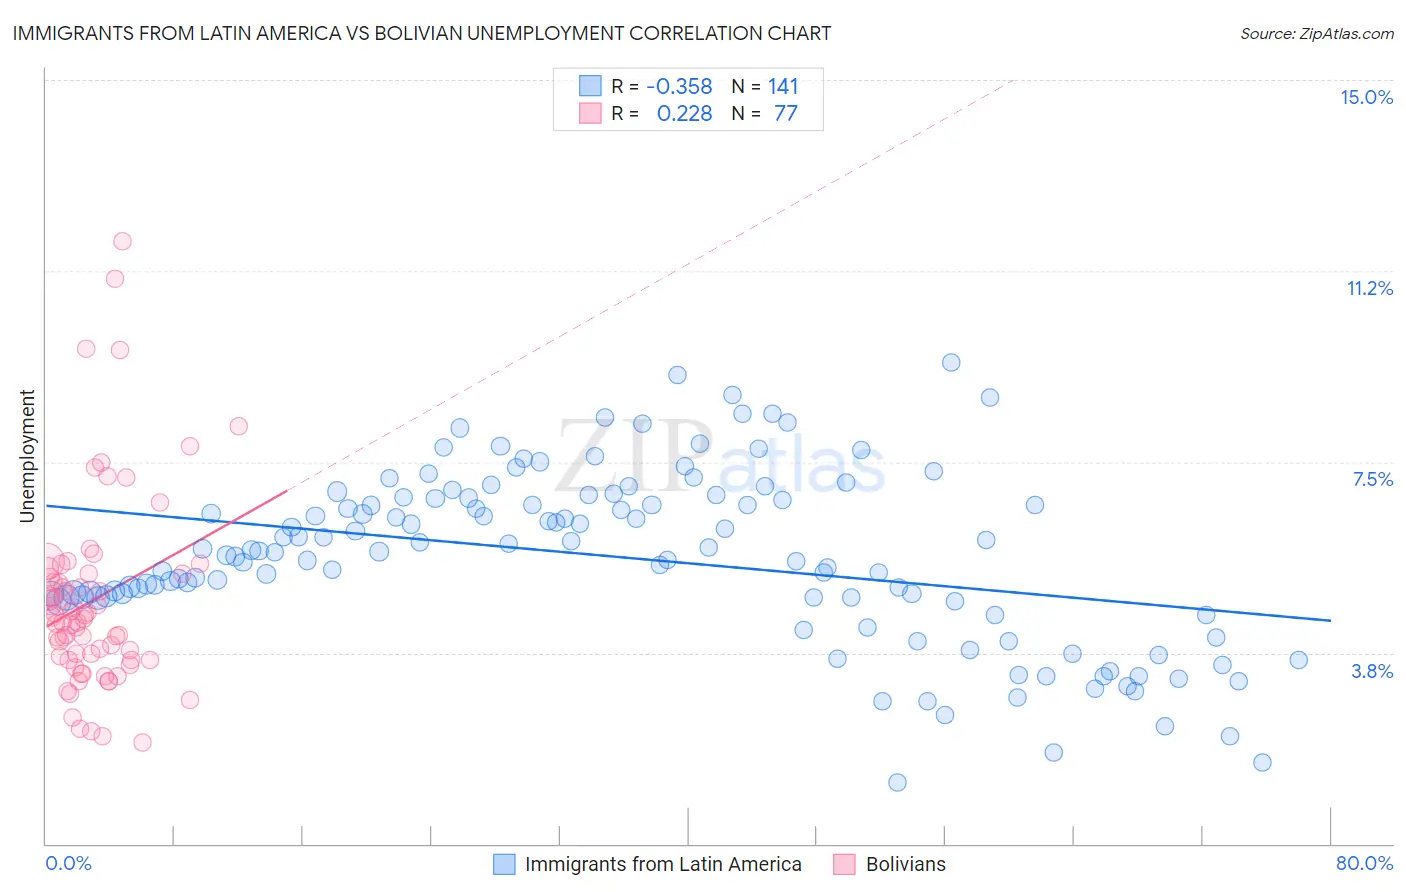 Immigrants from Latin America vs Bolivian Unemployment